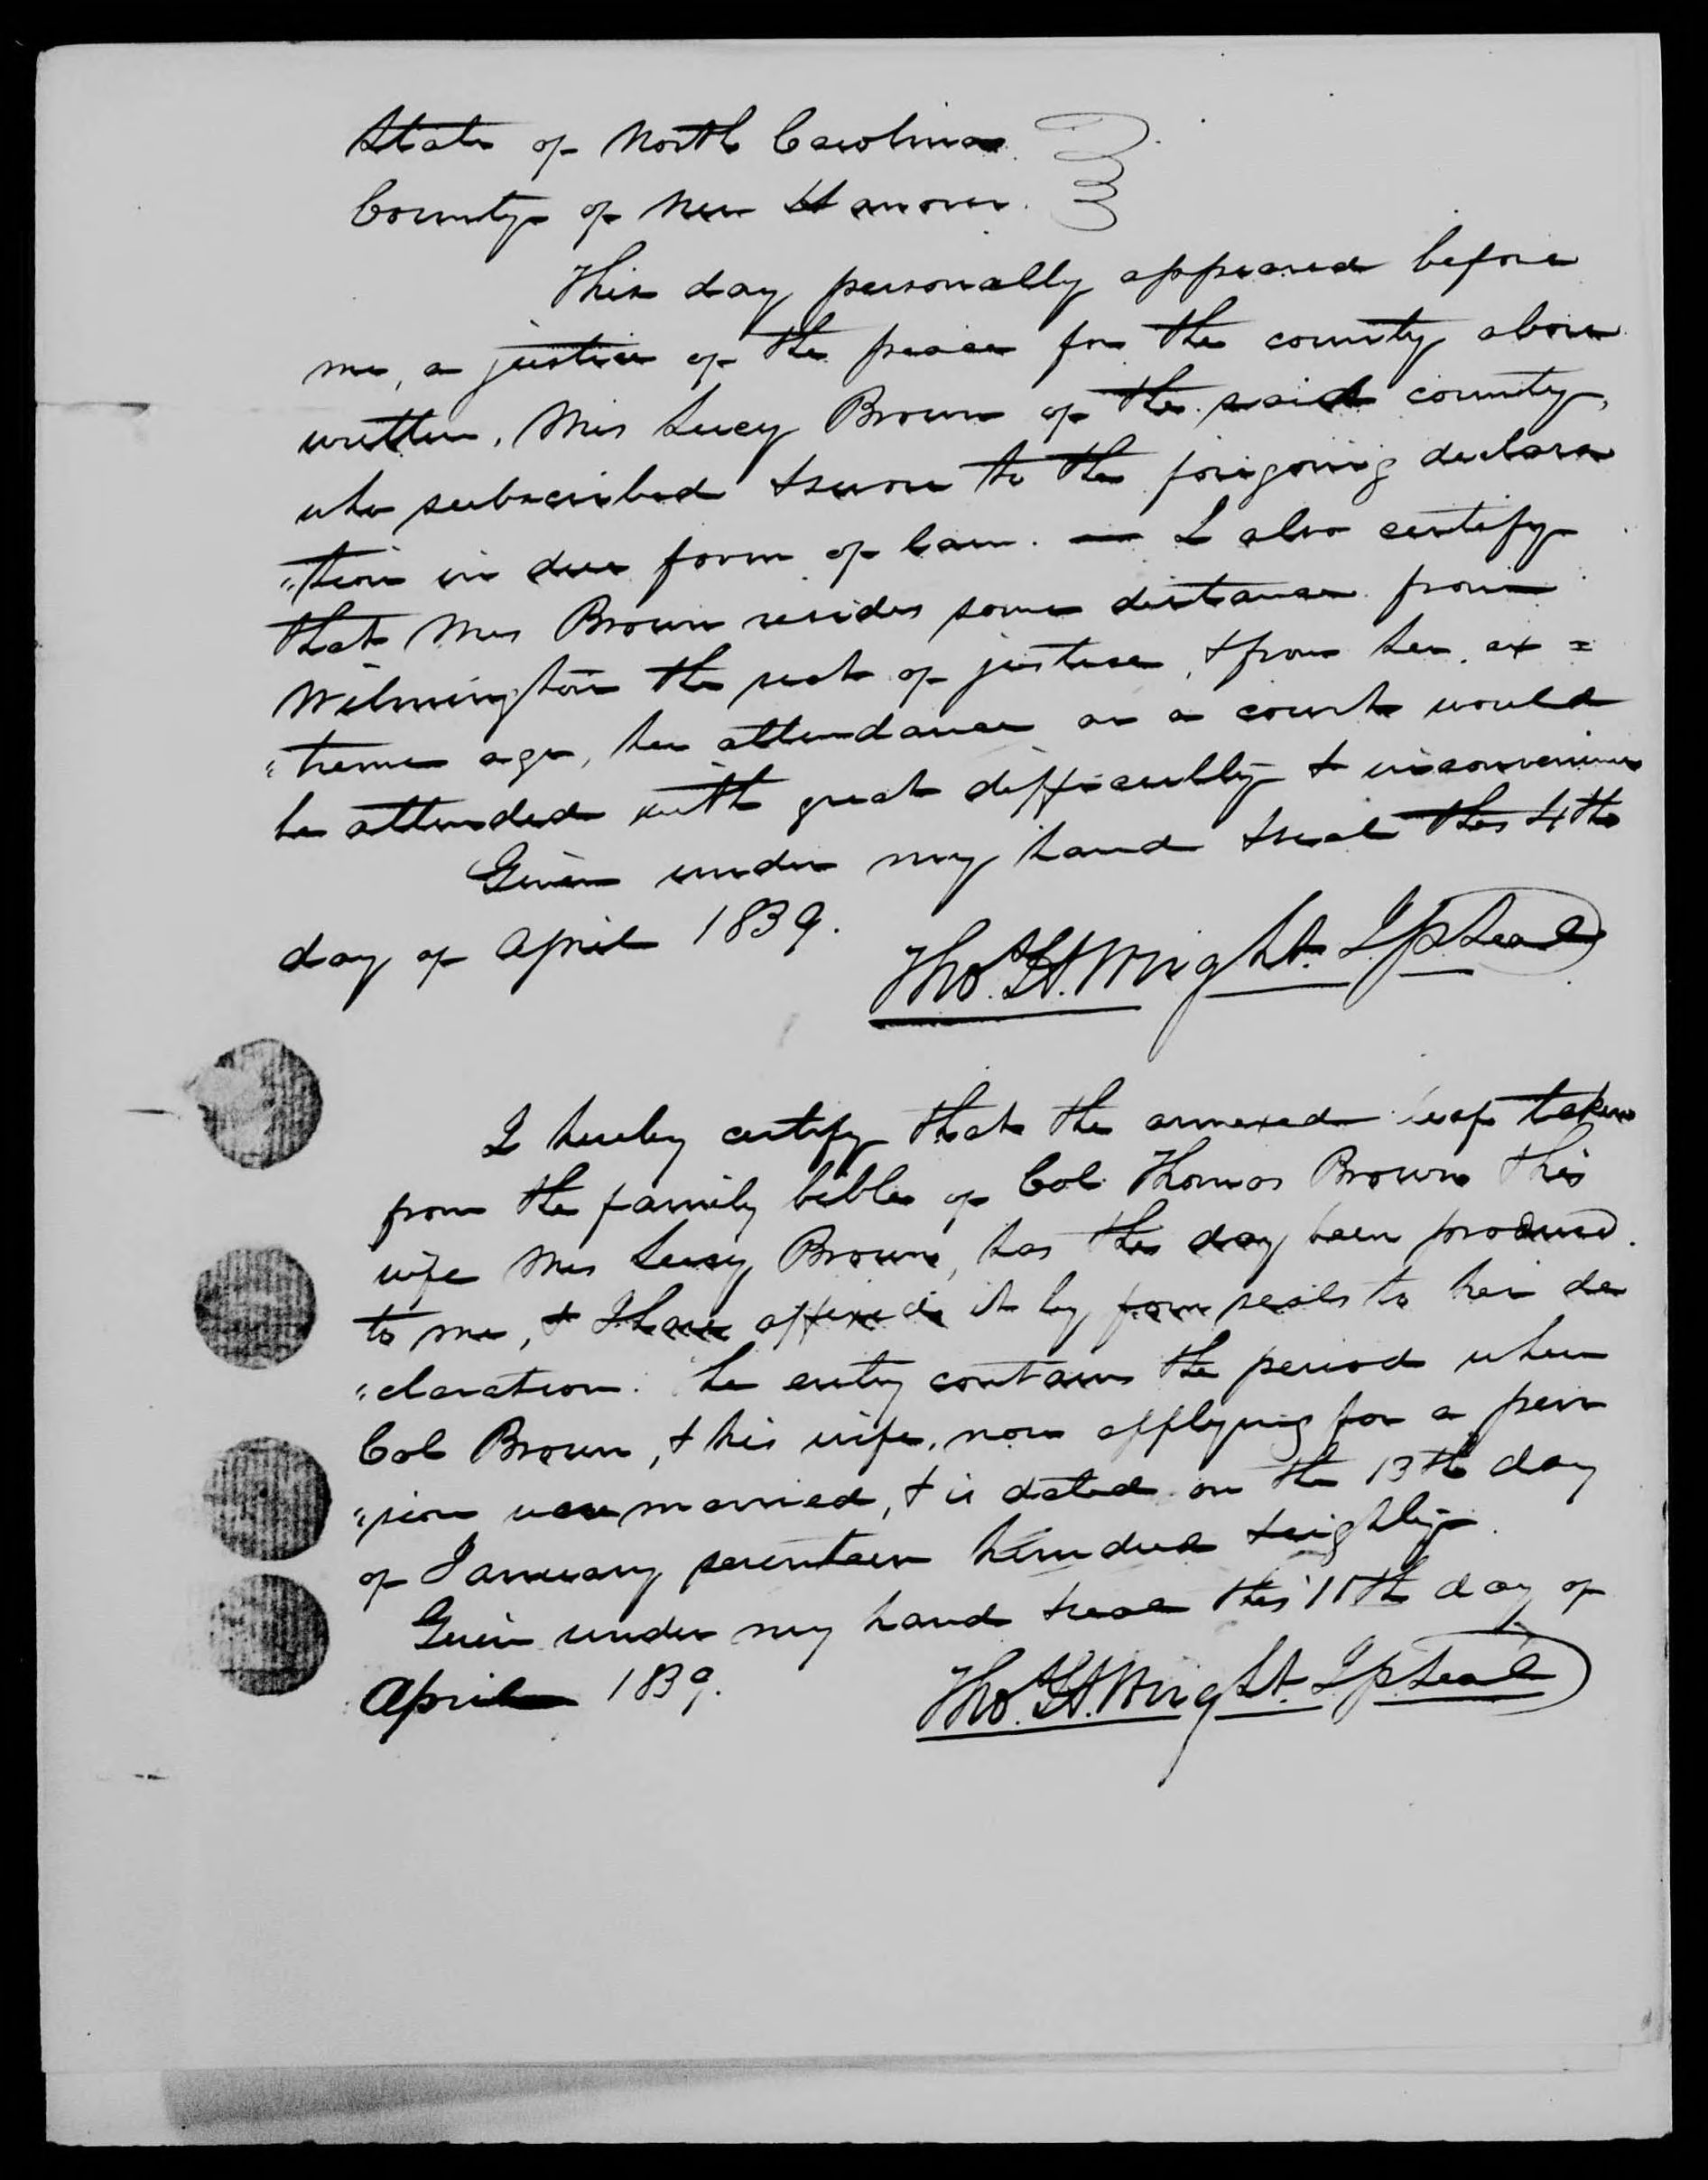 Application for a Widow's Pension from Rachel Locus, 4 October 1839, page 3